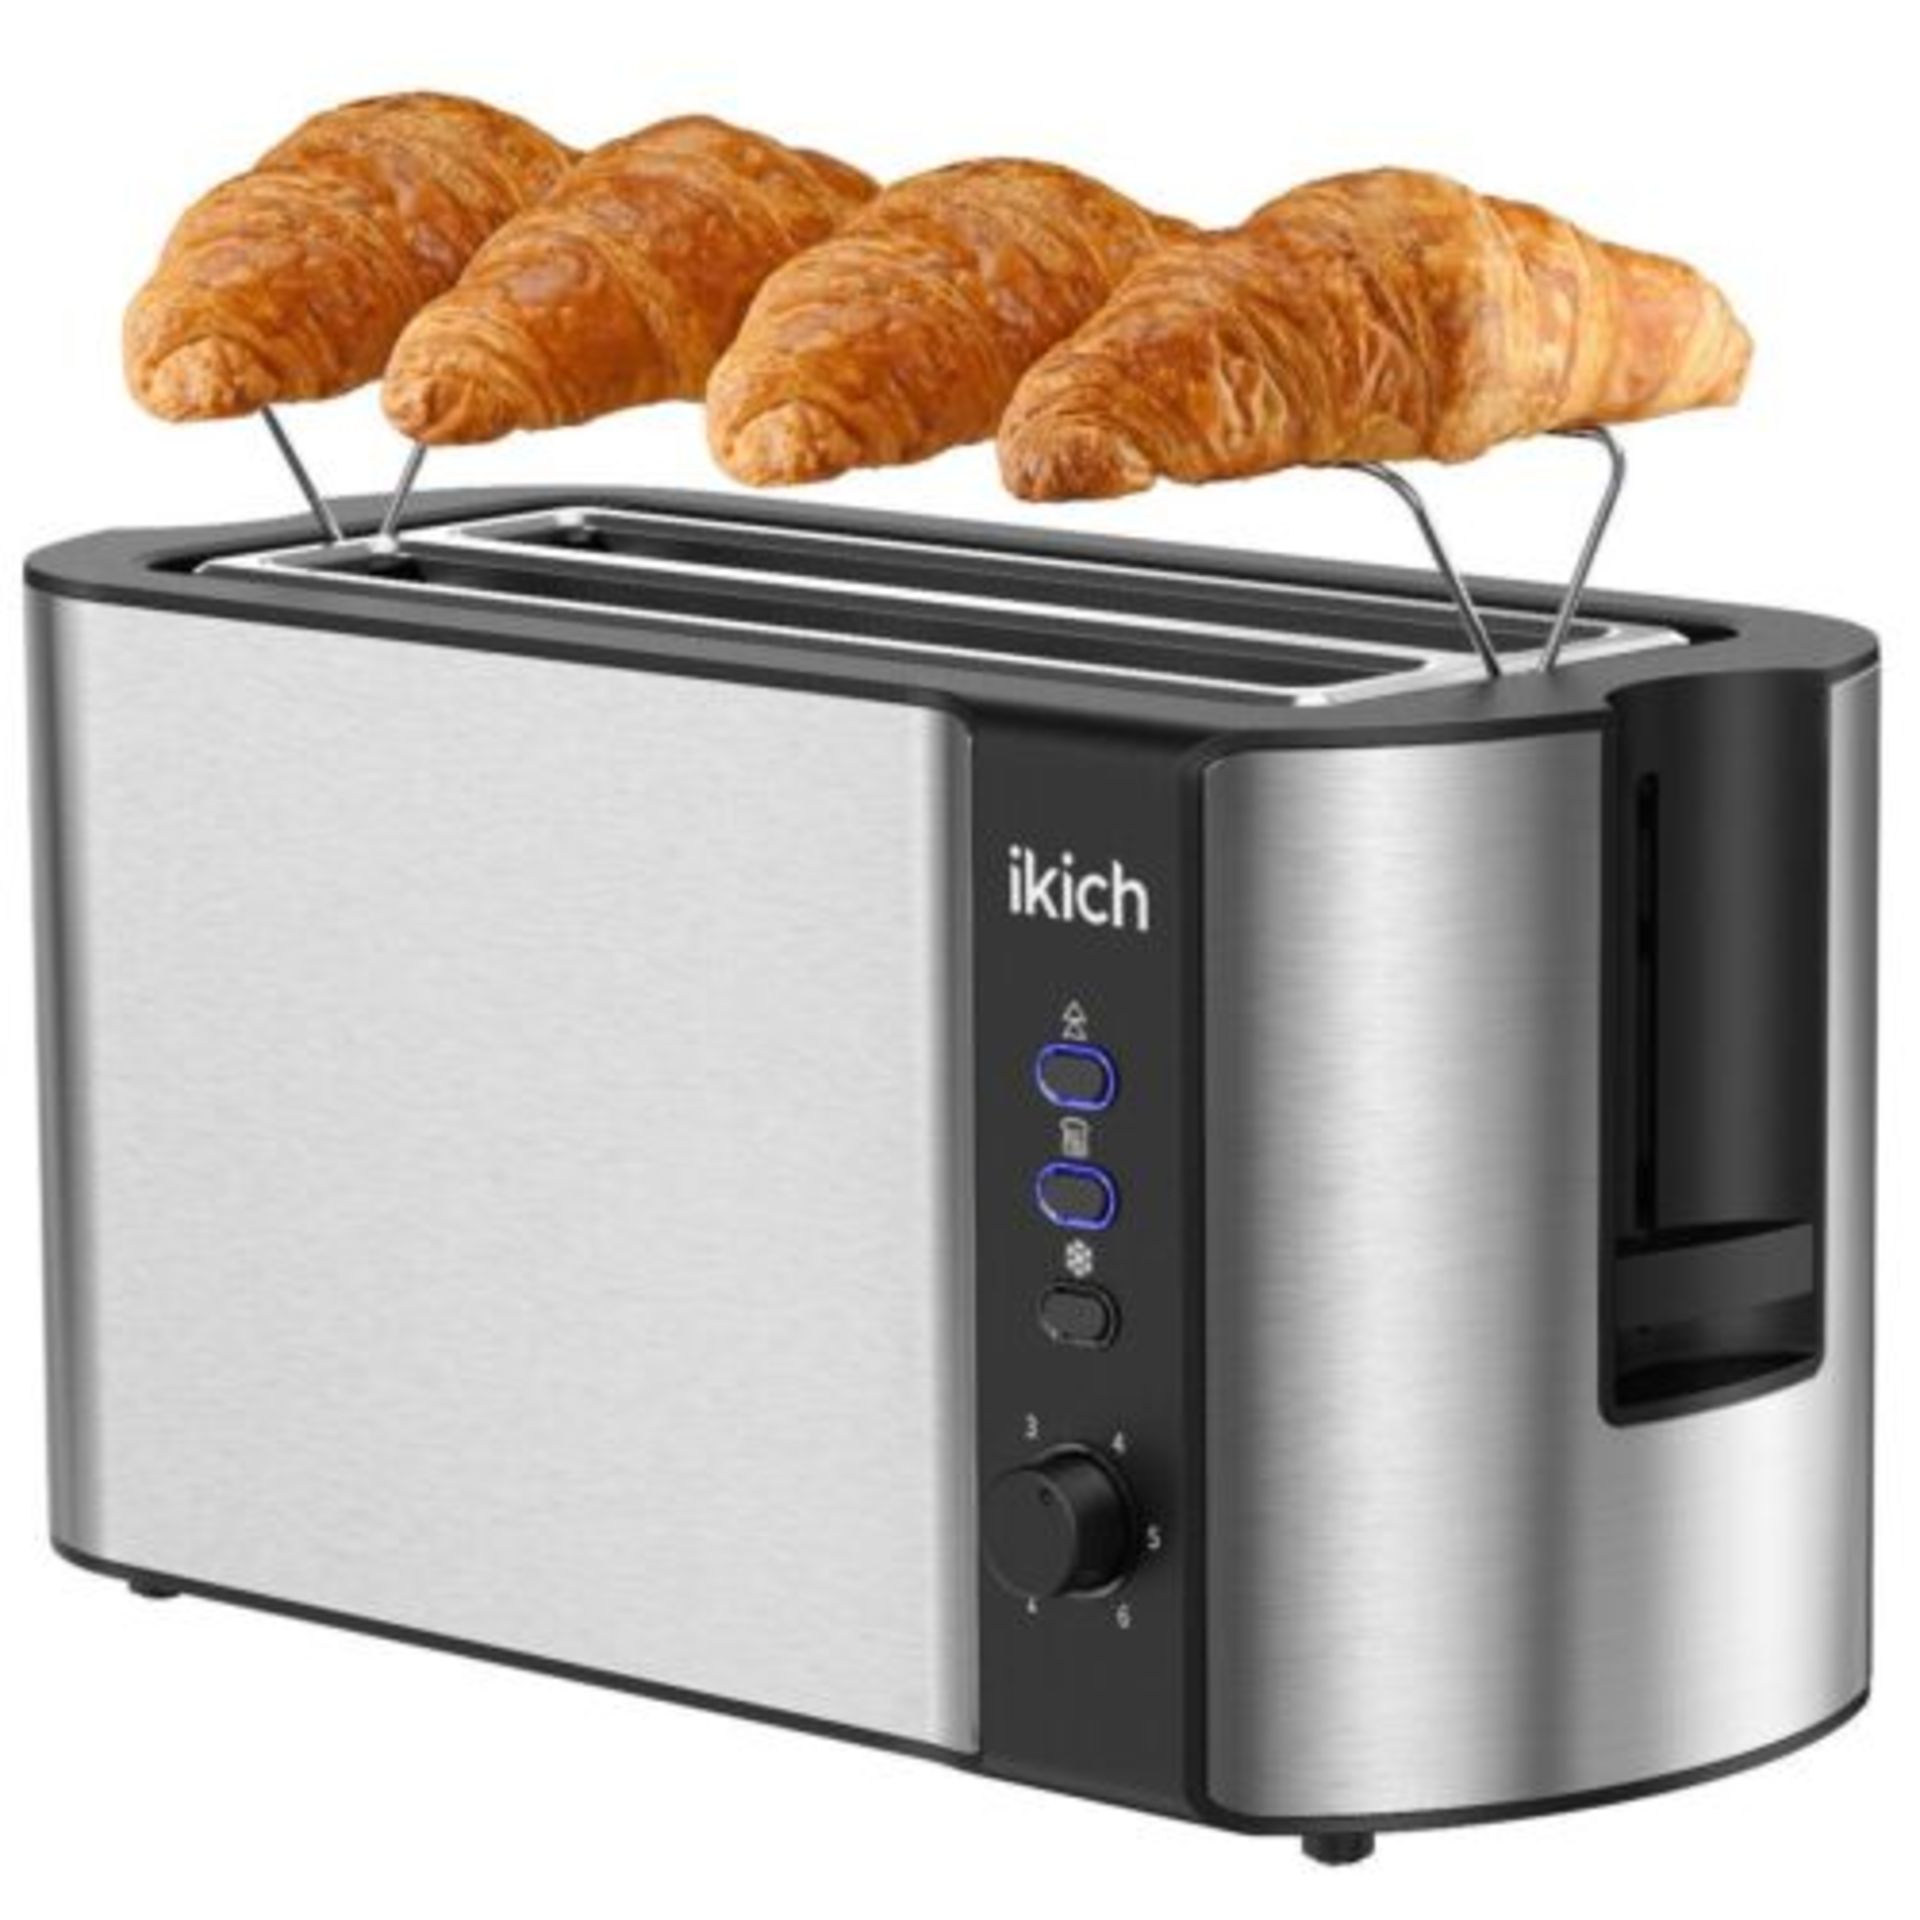 2 X NEW BOXED IKICK BY HOMASY 4 SLICE STAINLESS STEEL TOASTERS WITH LED DISPLAY (ROW18.8) 6